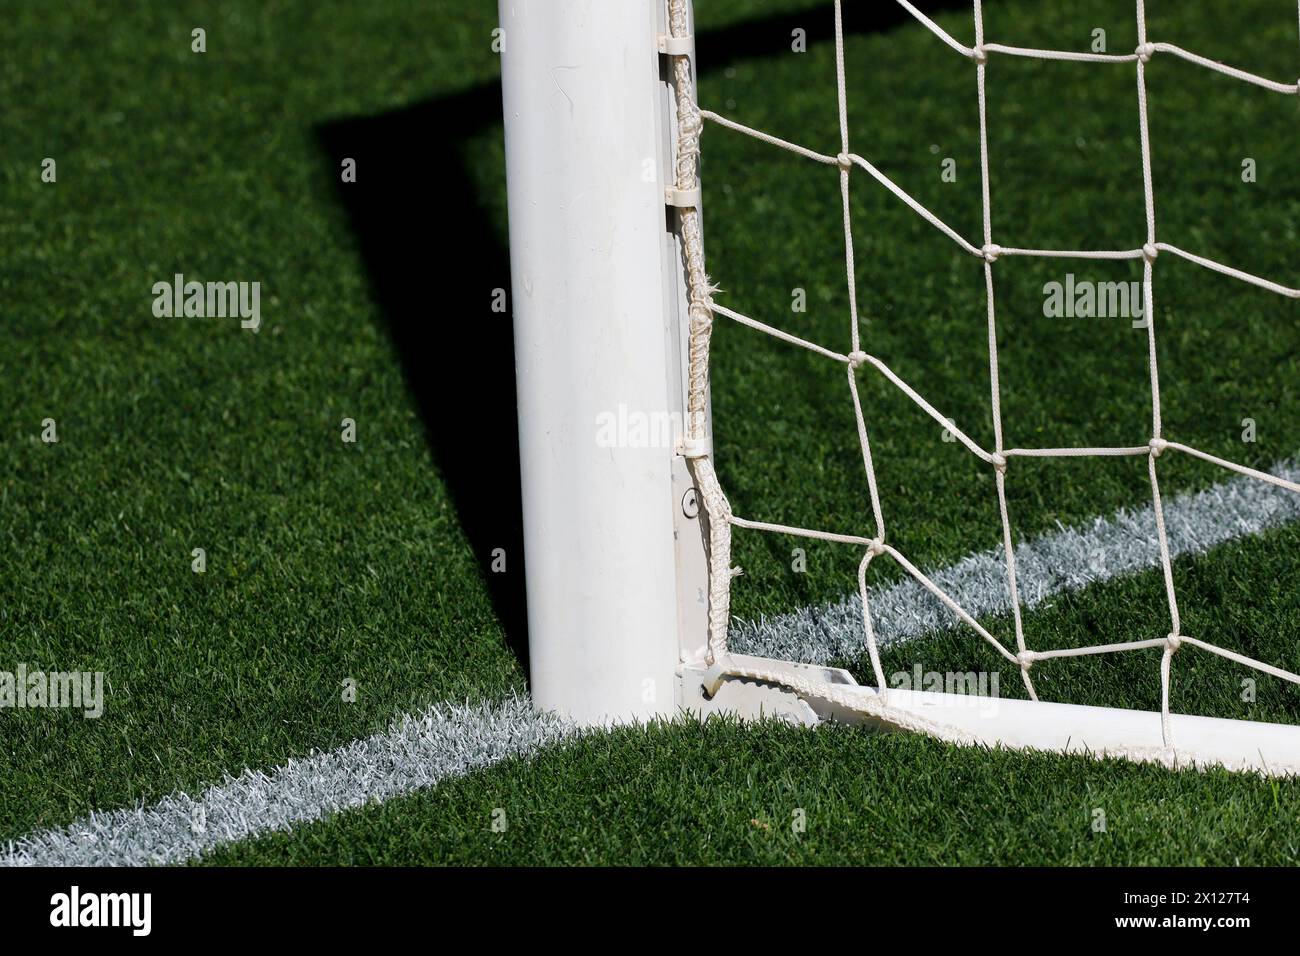 football goalpost standing tall against the backdrop of the pitch. Stock Photo